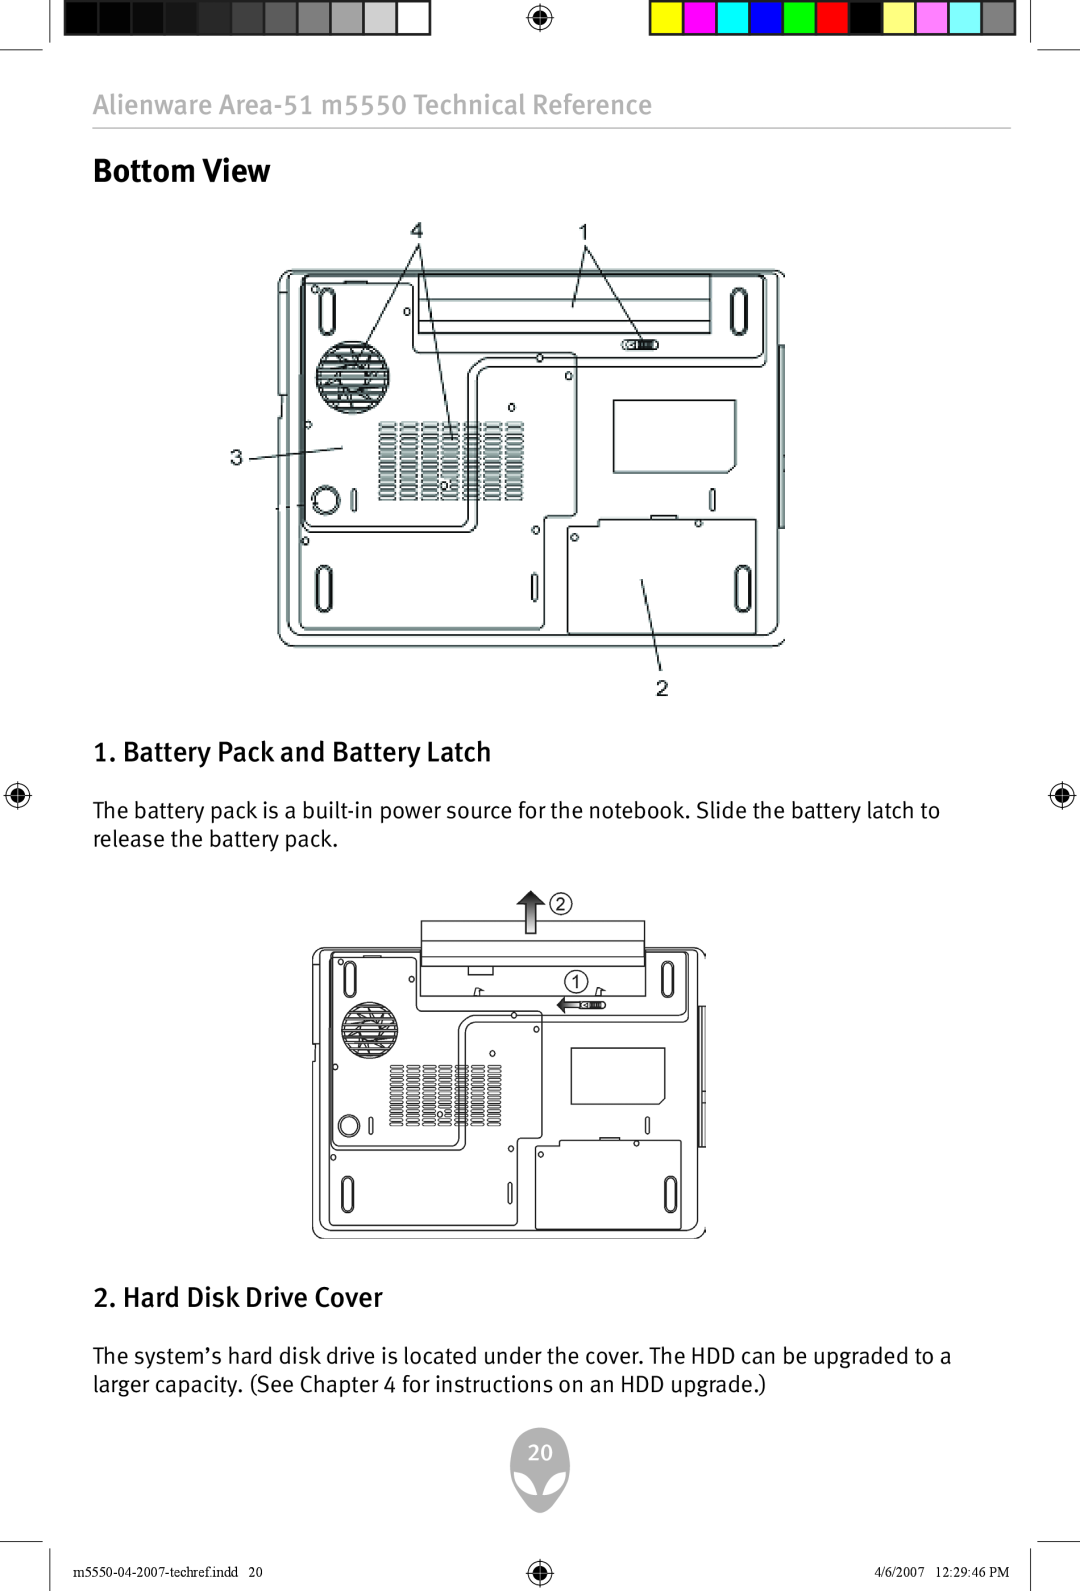 Alienware m5550 user manual Bottom View, Battery Pack and Battery Latch, Hard Disk Drive Cover 